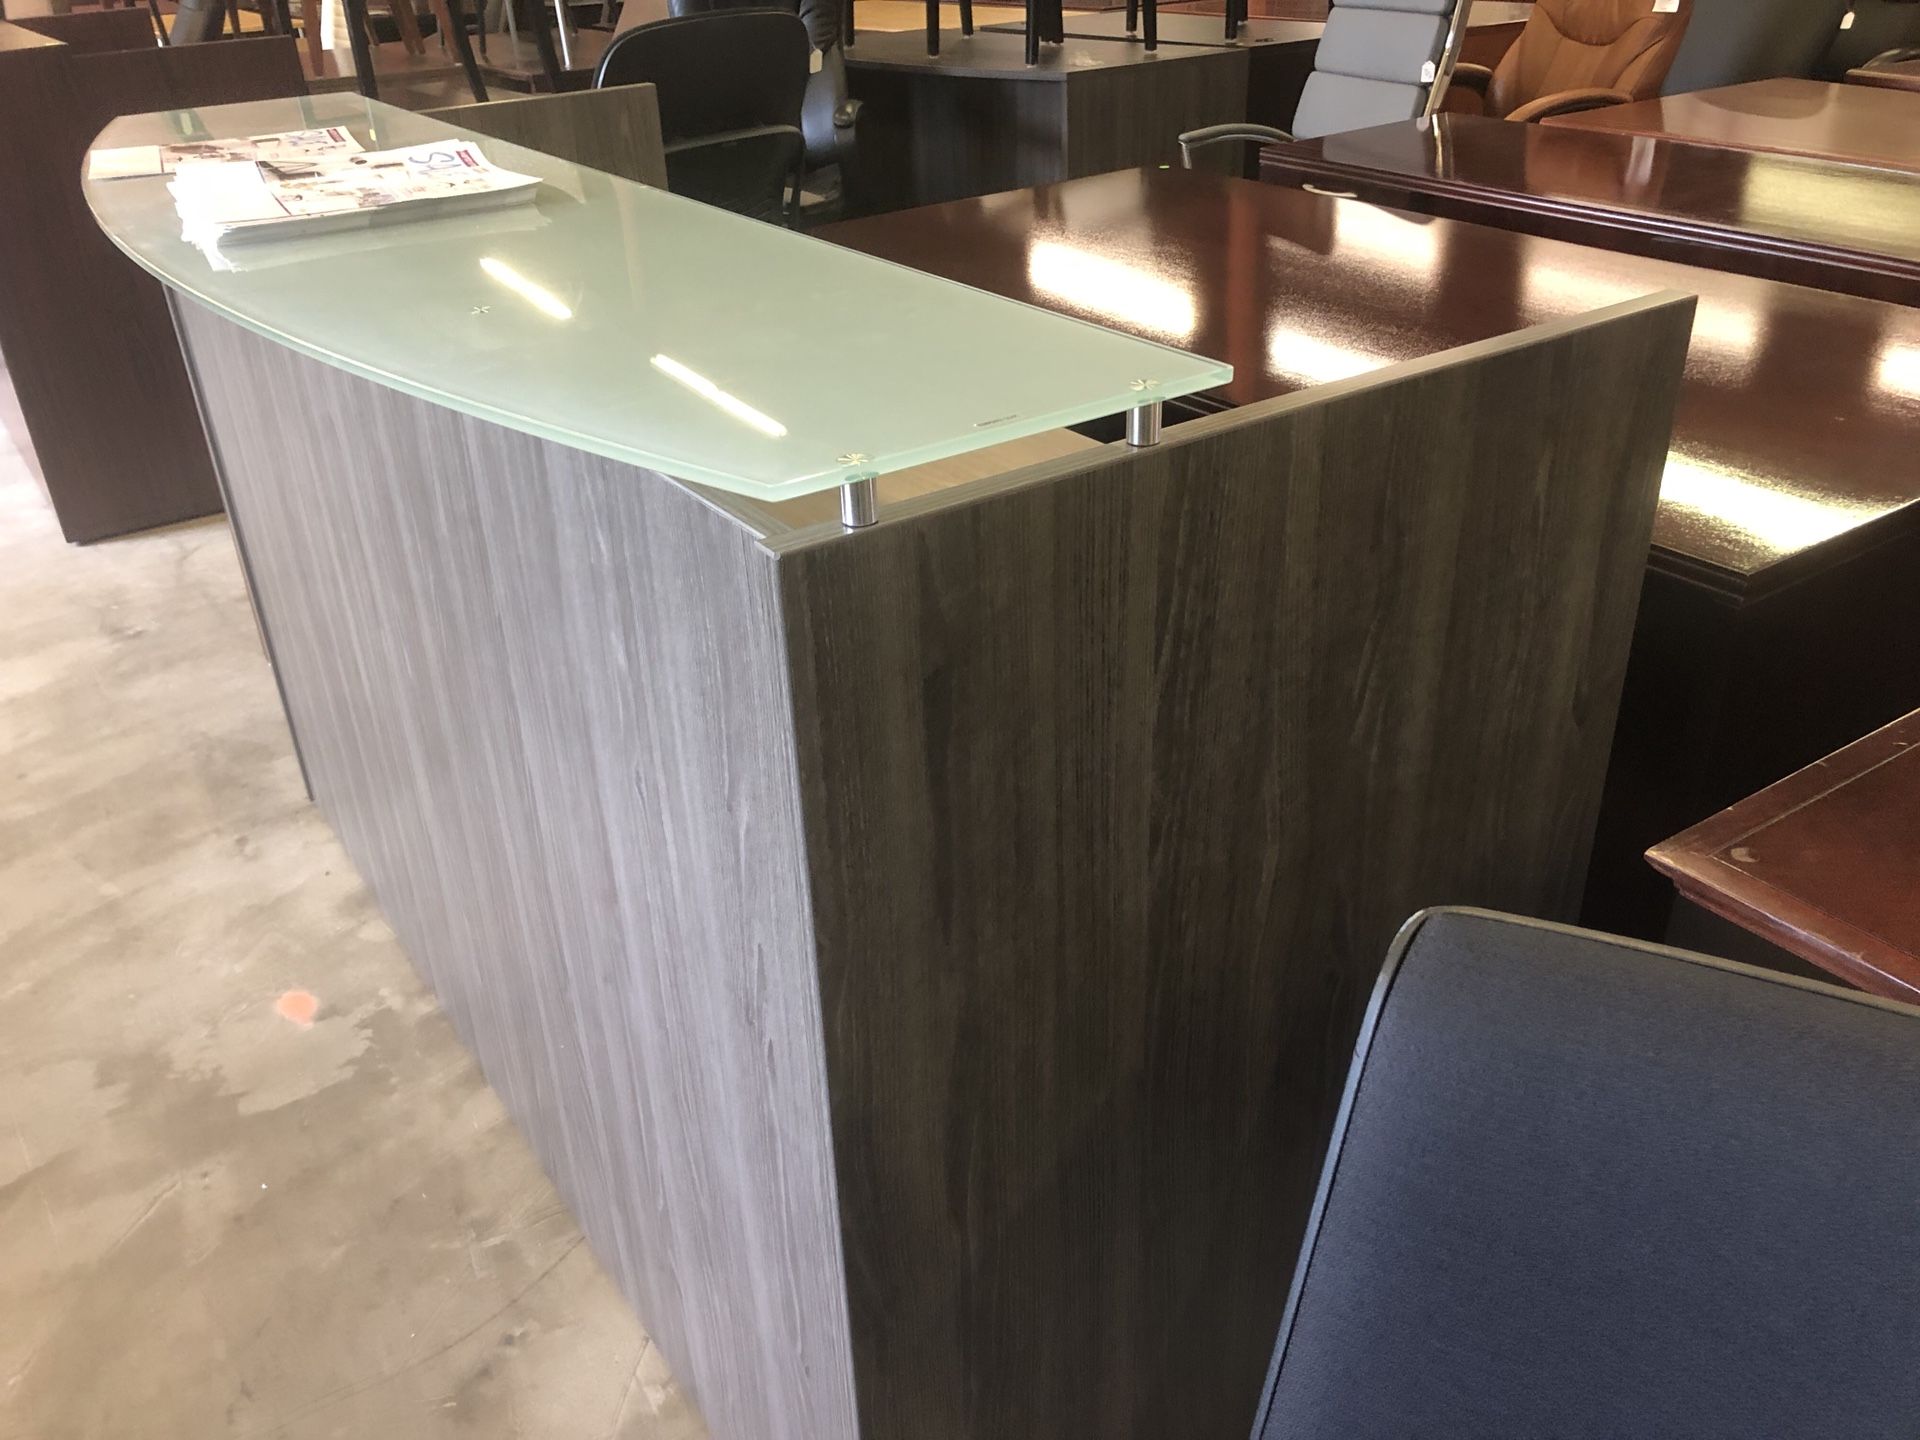 New gray reception desk with glass counter